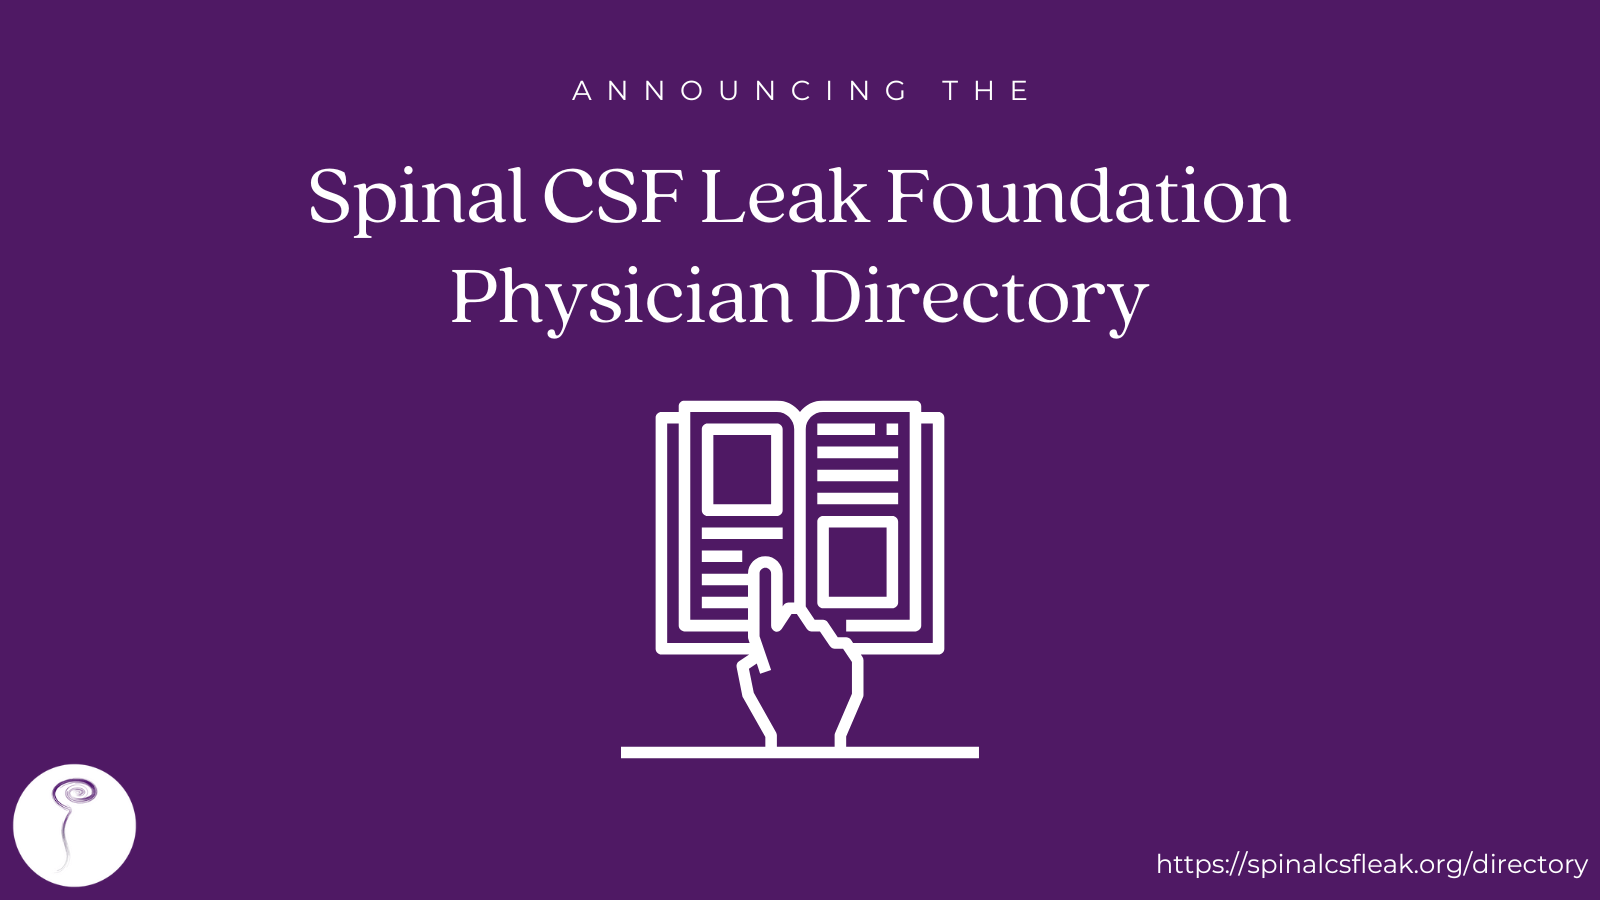 Announcing our new Physician Directory